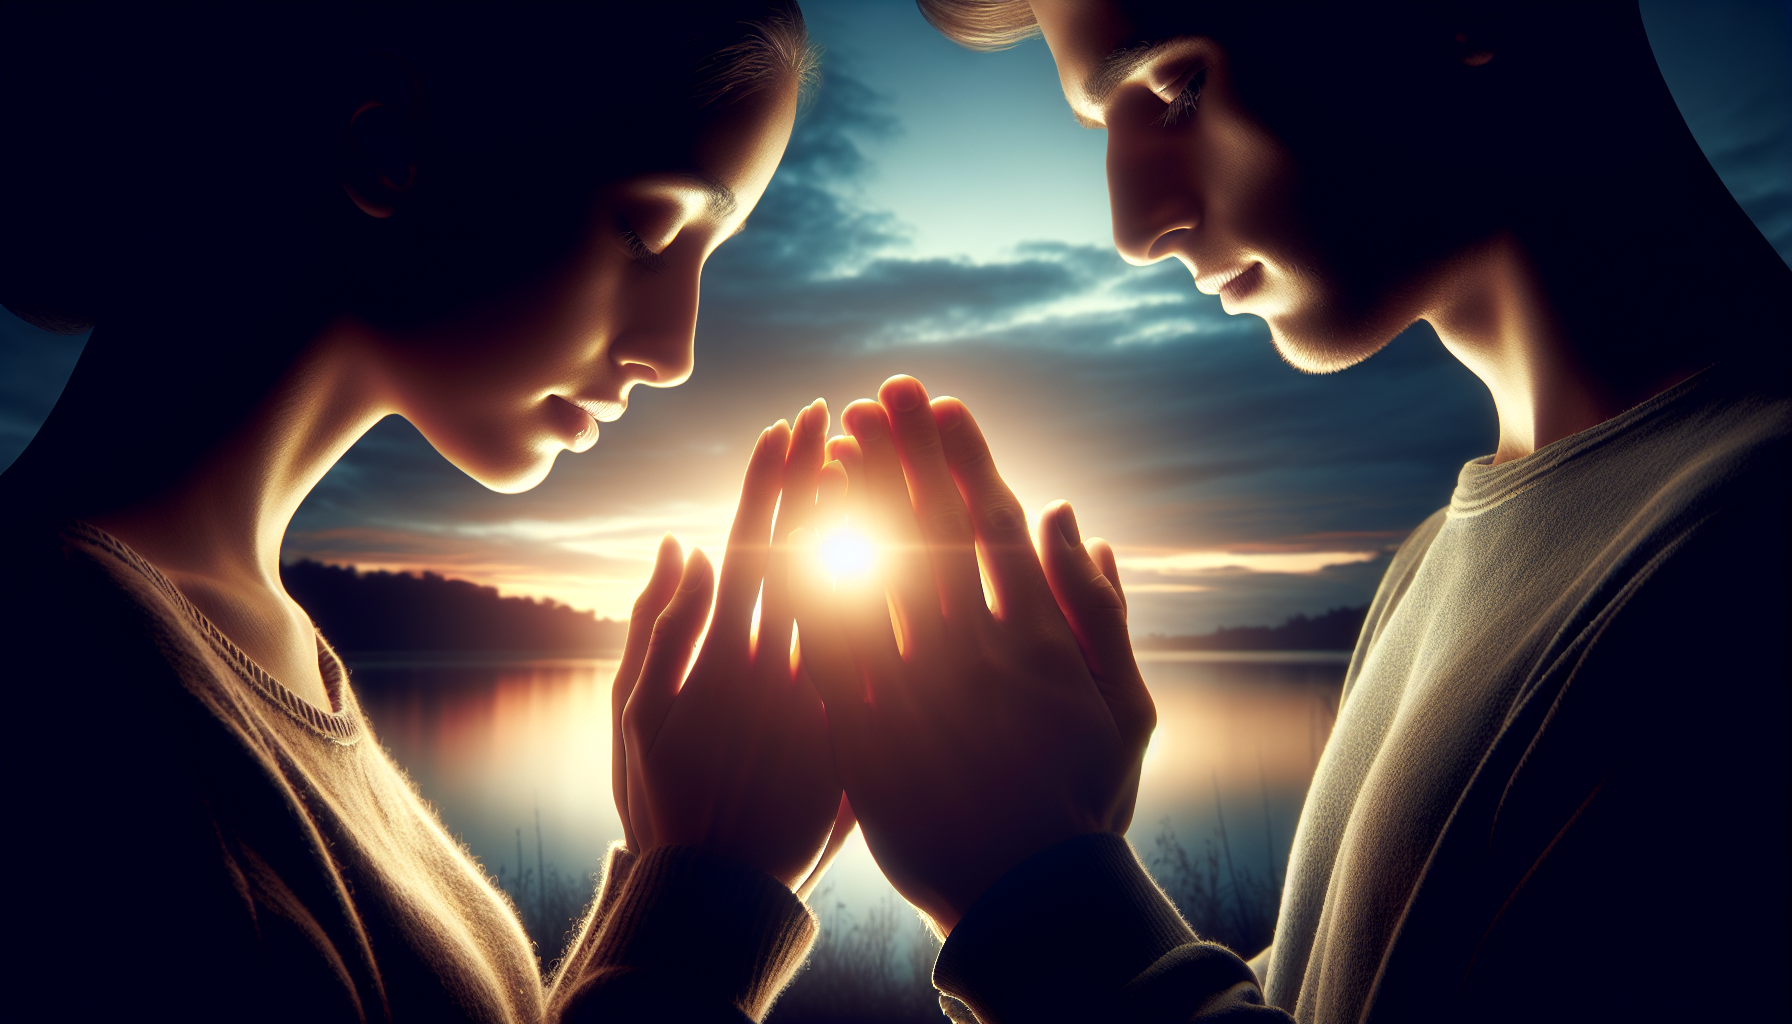 Two people holding hands and praying for a loved one's healing